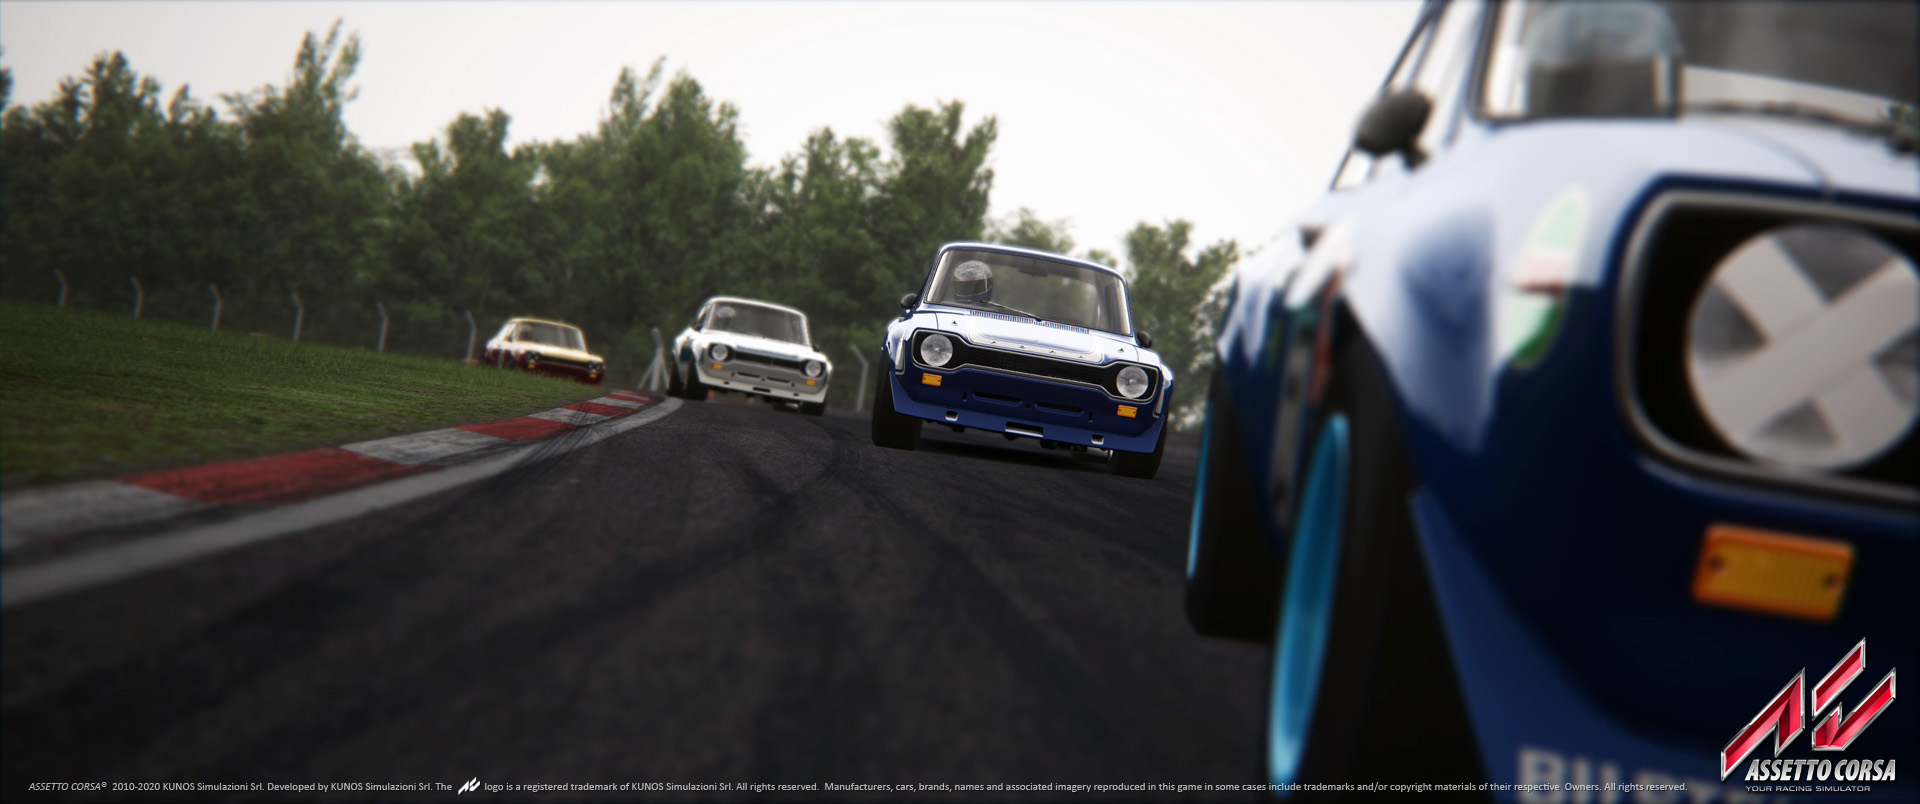 assetto corsa dlc tracks in multiplayer